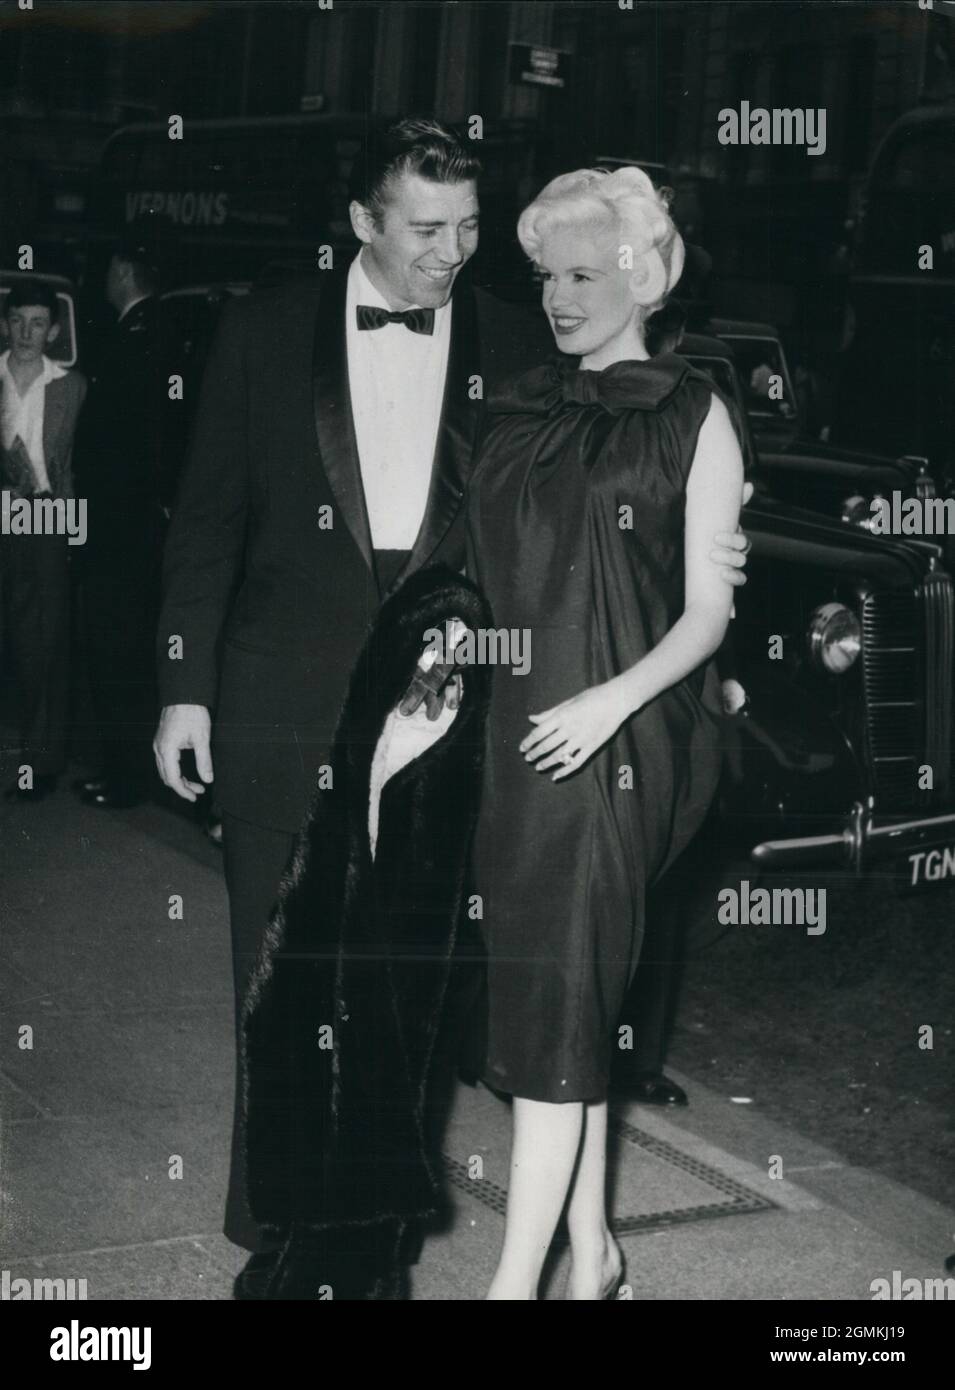 Jul. 07, 1958 - London, England, United Kingdom - JAYNE MANSFIELD, right, with her husband MICKEY HARGITAY, arrive at the Carlton, Hay market 1st, attend the premiere of the film ''The Battle of the V.l.''(Missiles From Hell). Mansfield, who wore a sack-style dress, yesterday announced that she is expecting a baby in December.  (Credit Image: © Keystone Press Agency/ZUMA Wire) Stock Photo